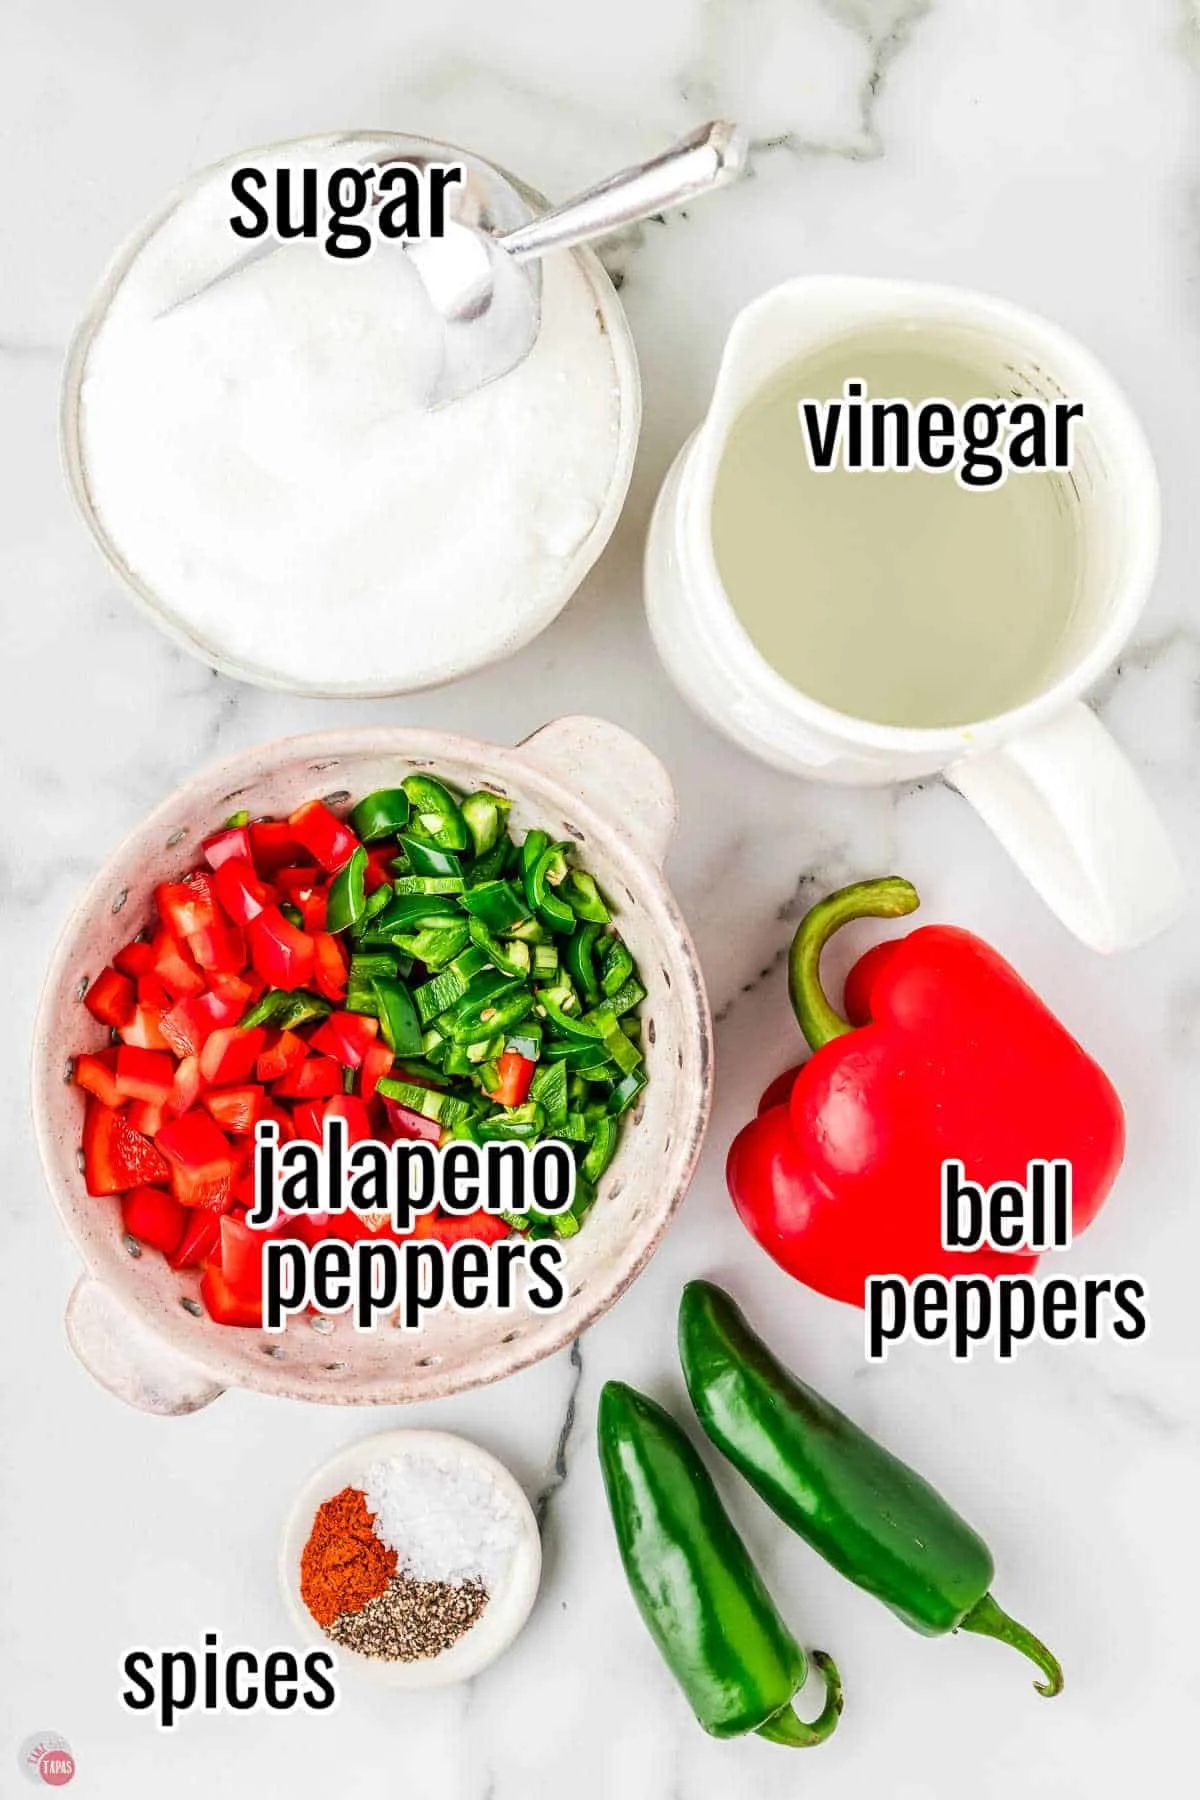 ingredients for jelly that include sweet peppers and hot peppers